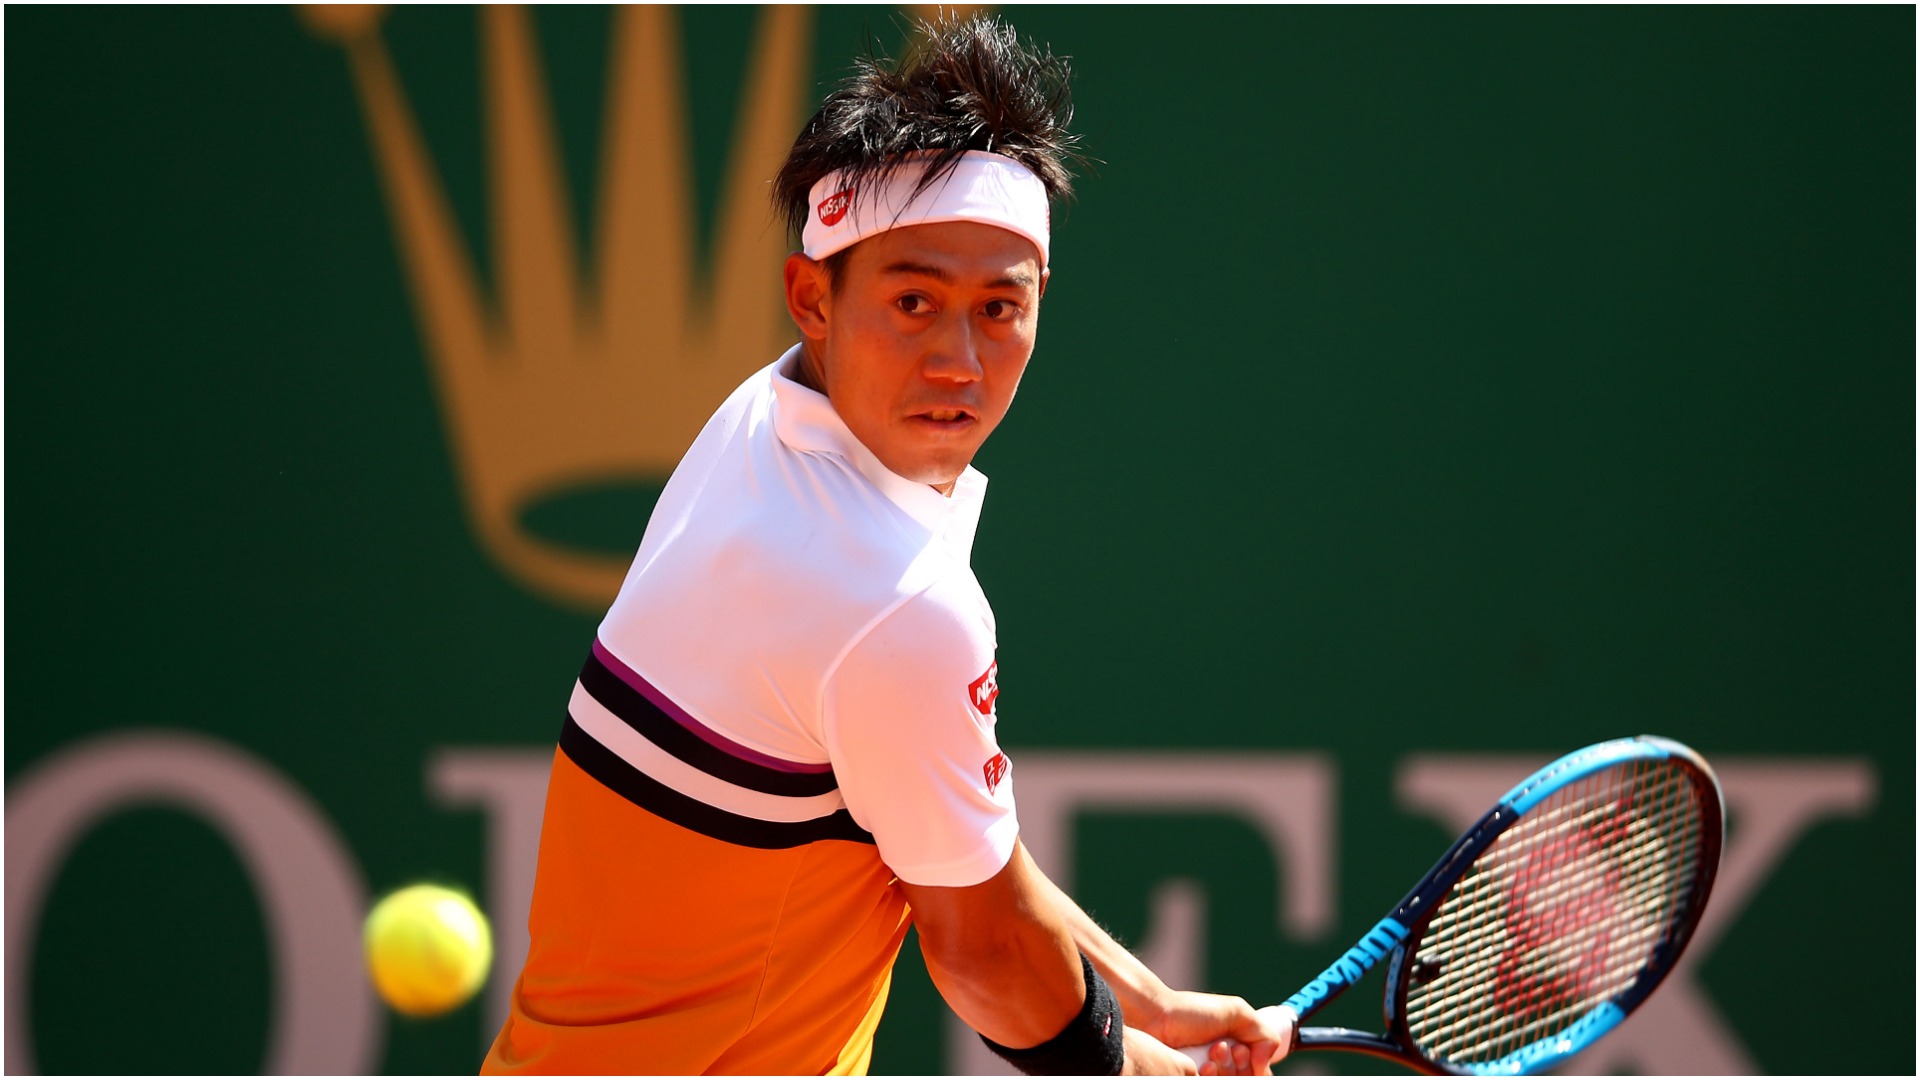 Kei Nishikori was the biggest scalp of Wednesday's play at the Monte Carlo Masters, as Rafael Nadal and Dominic Thiem raced through.